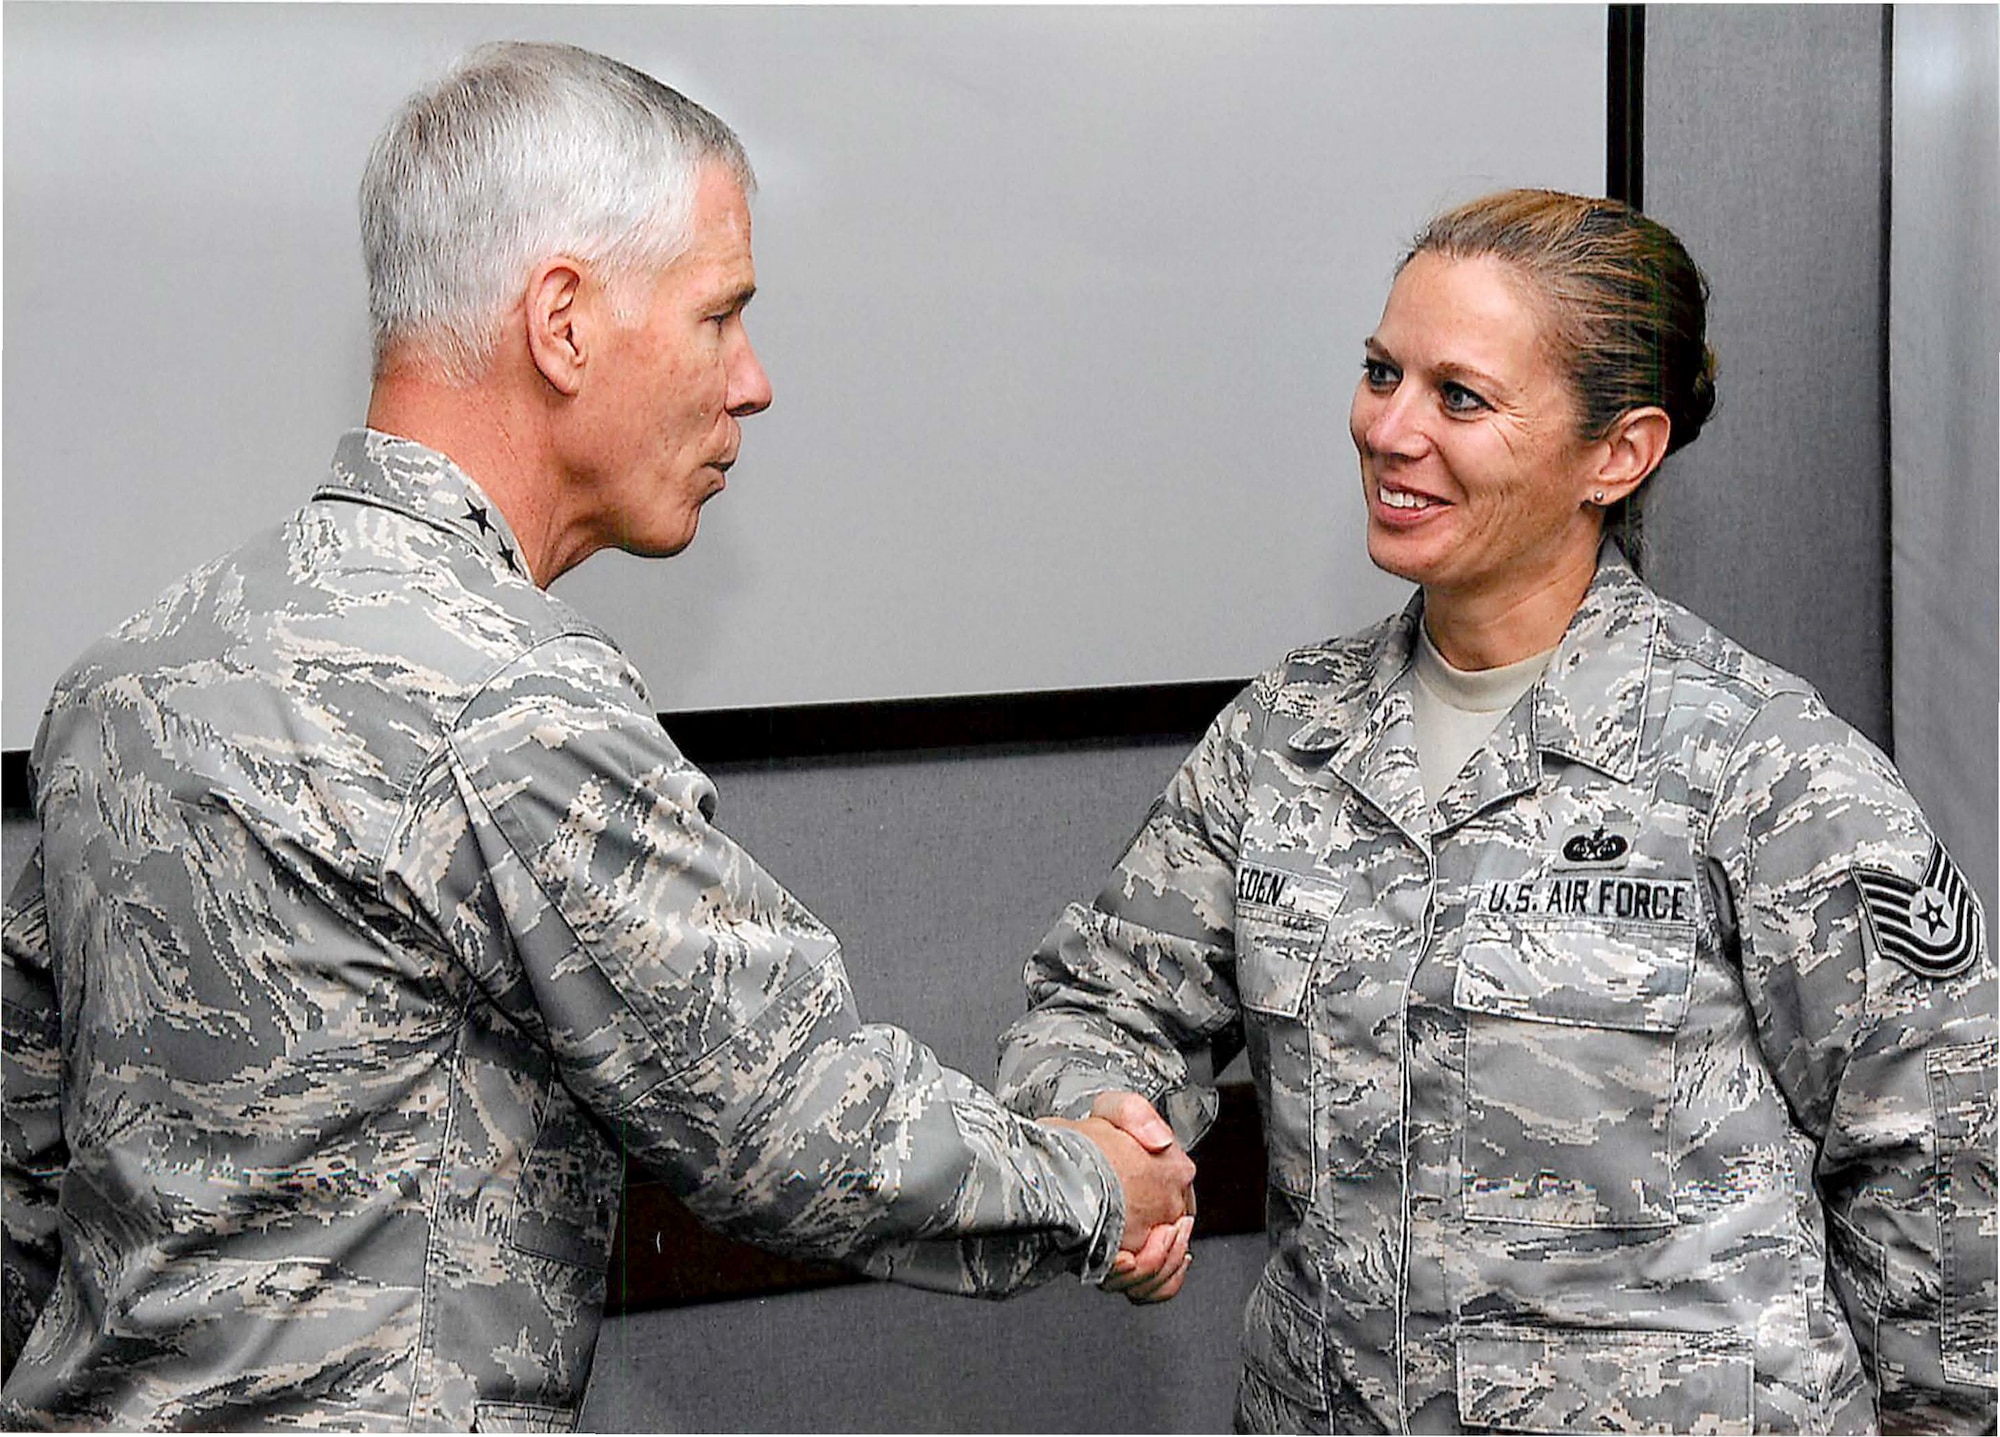 Gen. William Shelton, Commander, Air Force Space Command, congratulates and “coins” (then technical sergeant) Master Sgt. Sherrie Eden for her Recruiting Service accomplishments.  Eden, an Air Force Reserve line recruiter at the 302nd Airlift Wing at Peterson Air Force Base, Colo. tied for first place in a challenge issued by Shelton. The general asked recruiters to try to find placements for critically manned space operations positions. Eden who placed 48-percent of her recruits in space command during the challenge timeframe, was surprised by the honor. “I’m just focused on doing my job,” said Eden (Courtesy photo)